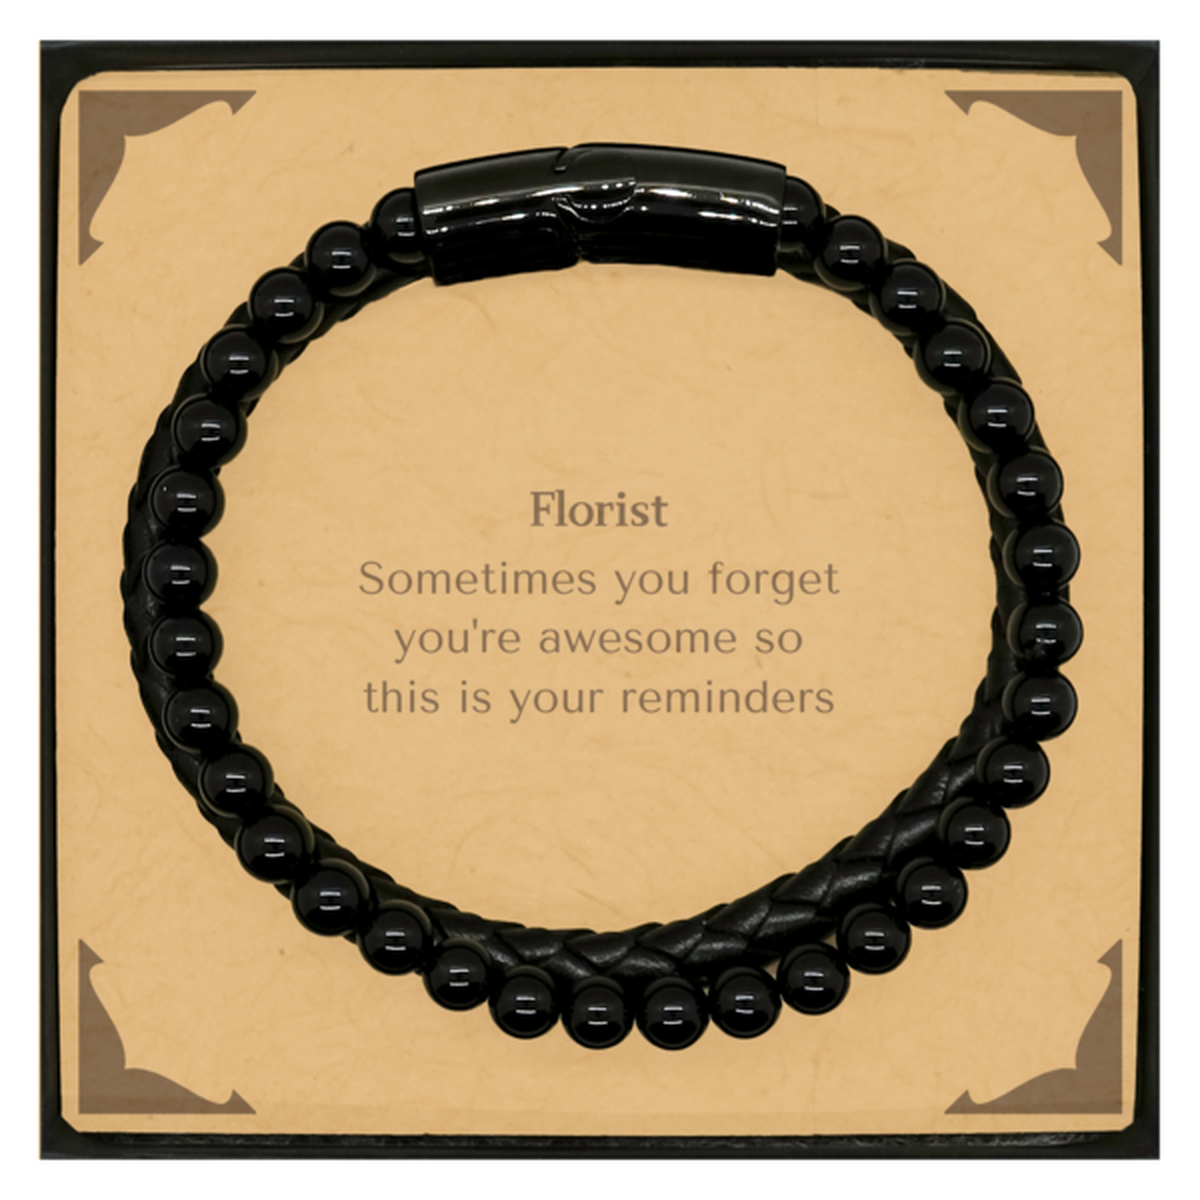 Sentimental Florist Stone Leather Bracelets, Florist Sometimes you forget you're awesome so this is your reminders, Graduation Christmas Birthday Gifts for Florist, Men, Women, Coworkers